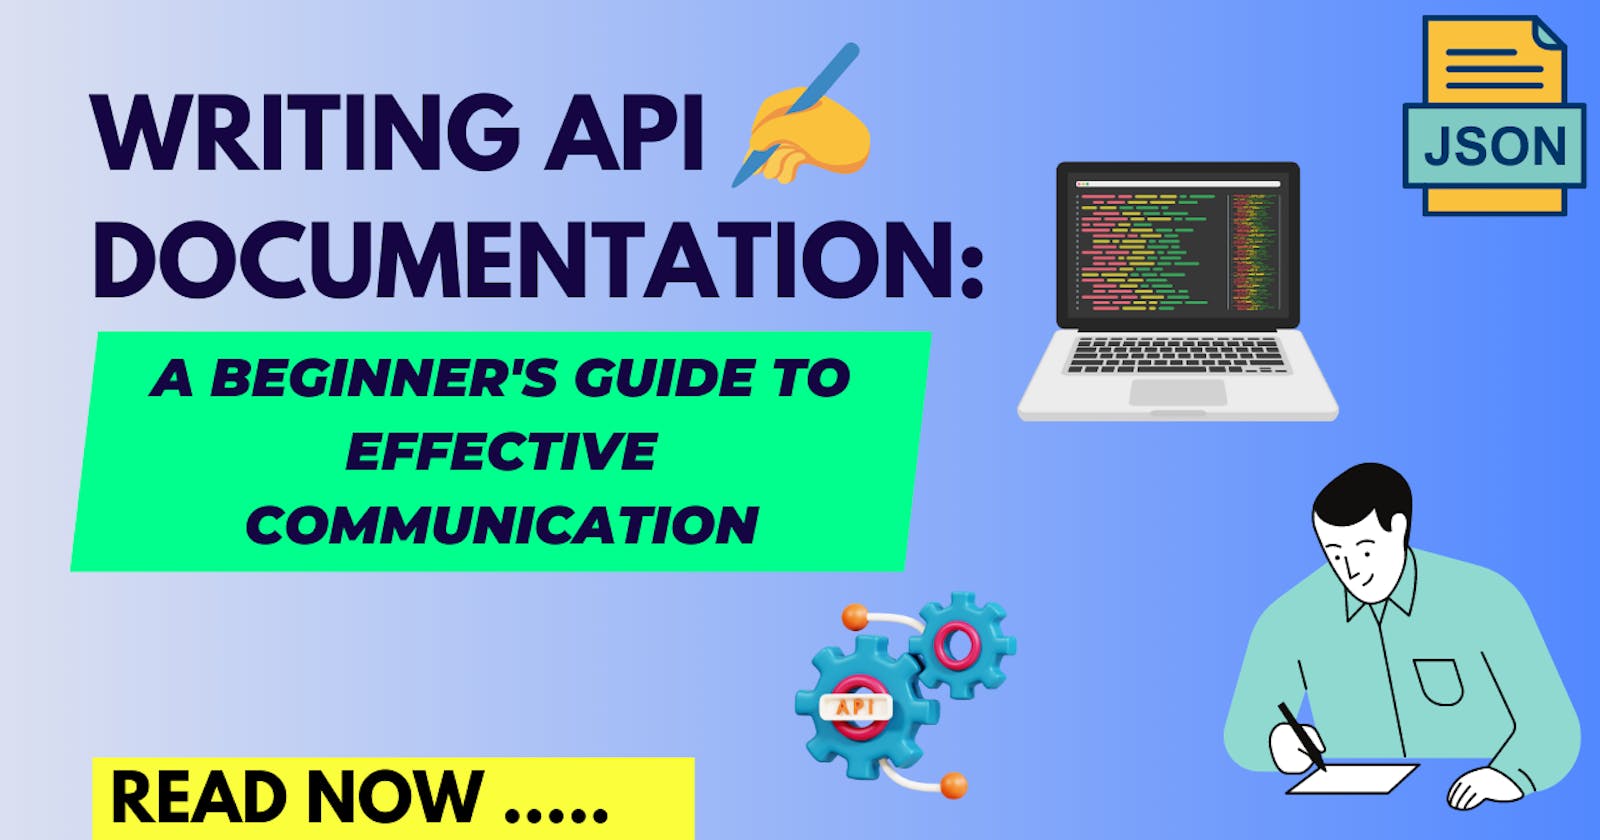 Writing API Documentation: A Beginner's Guide to Effective Communication